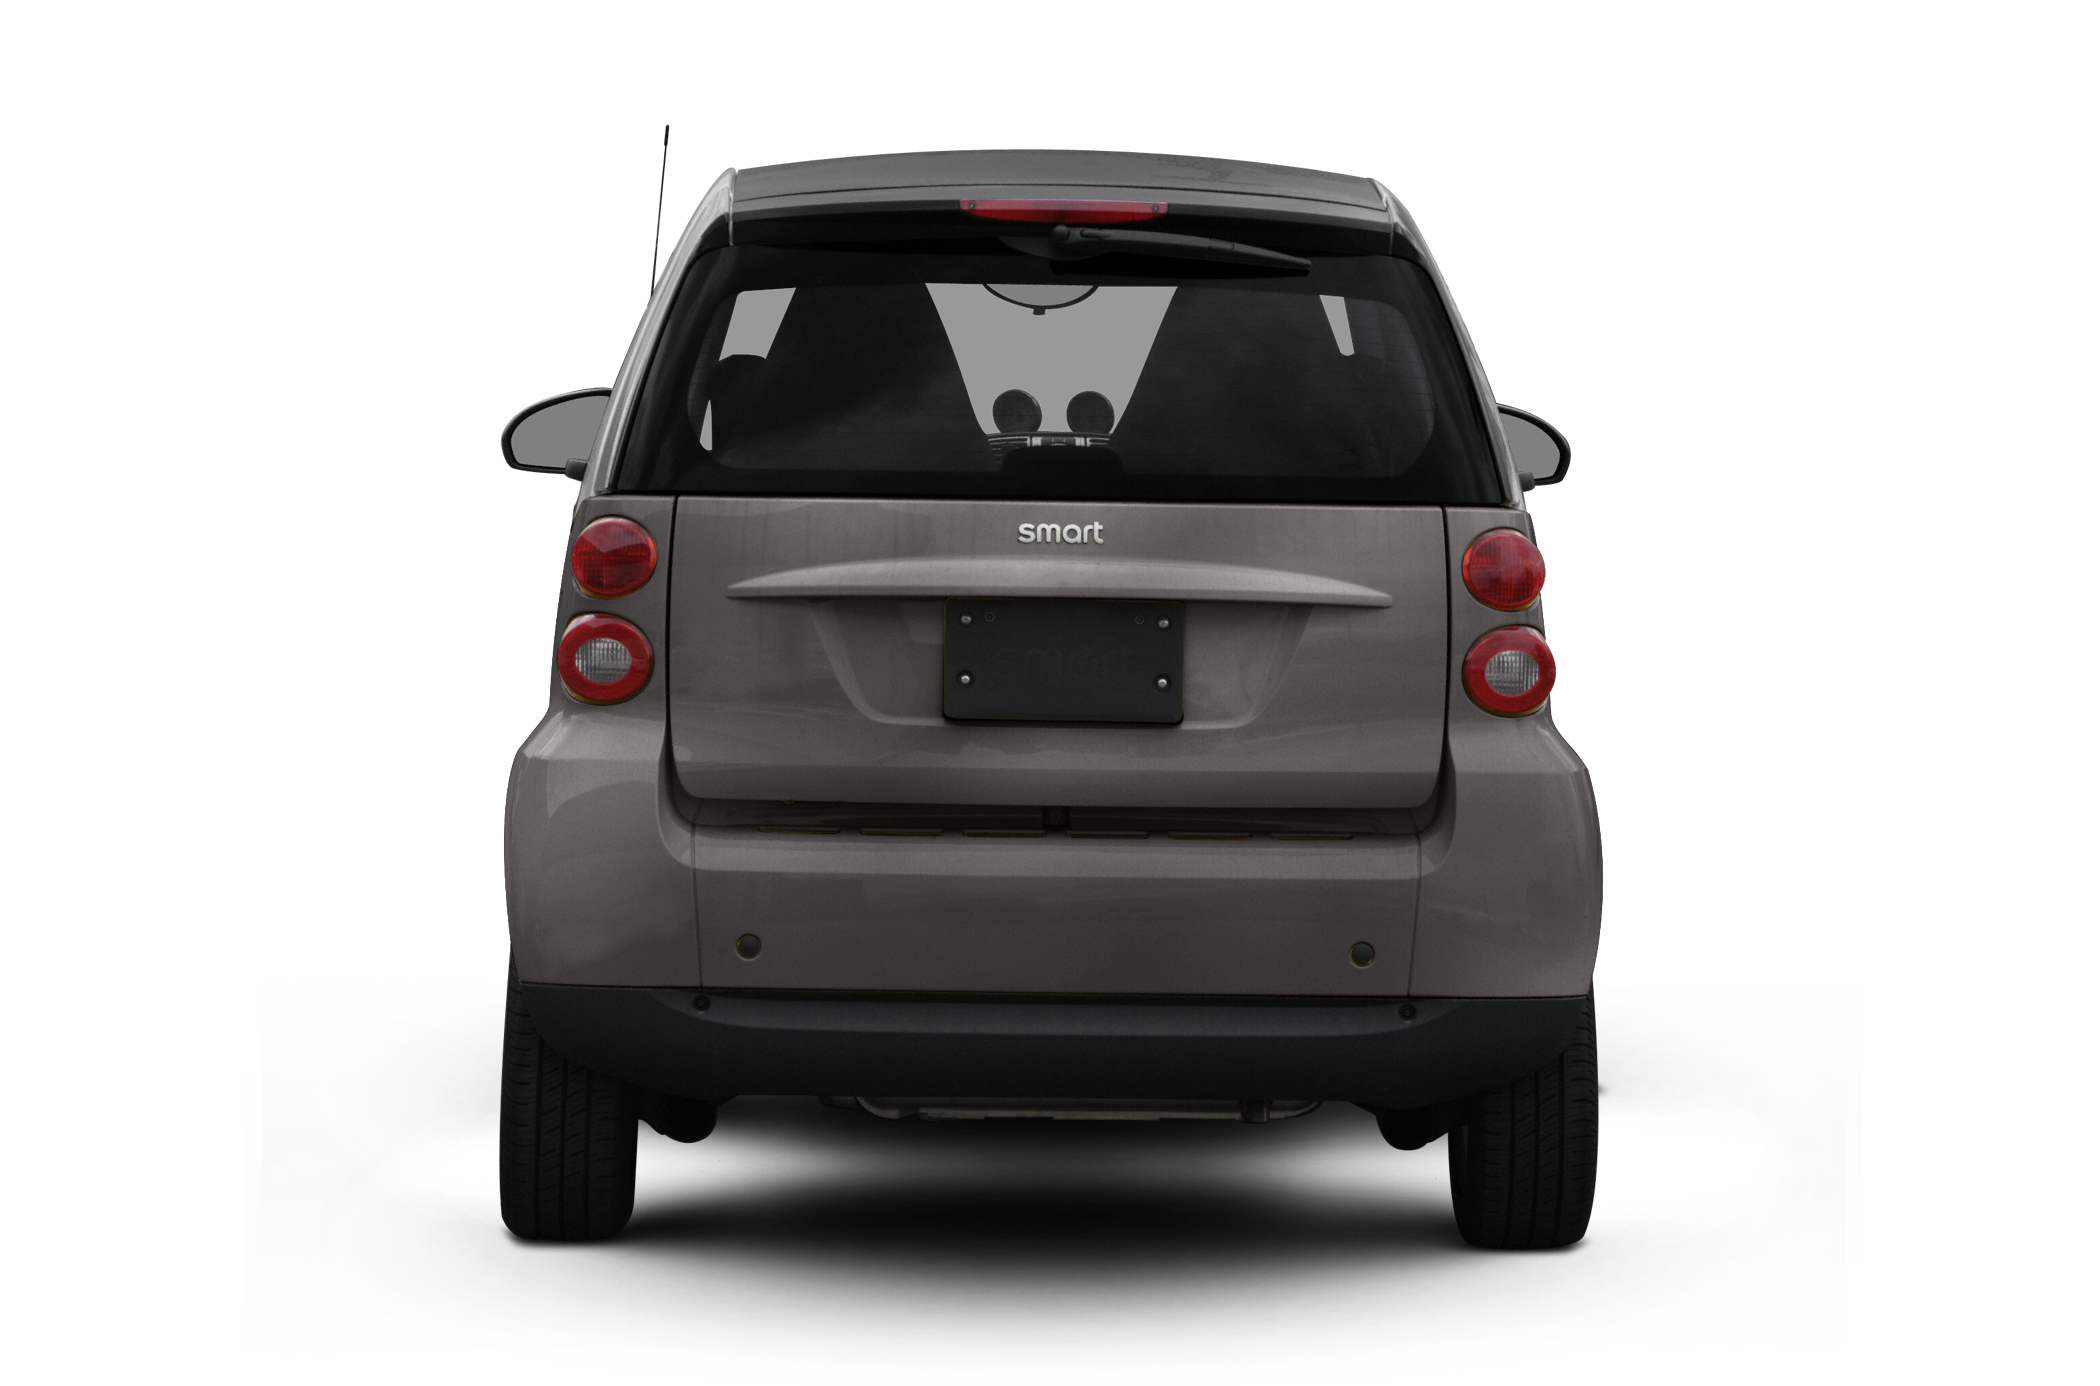 2010 smart ForTwo